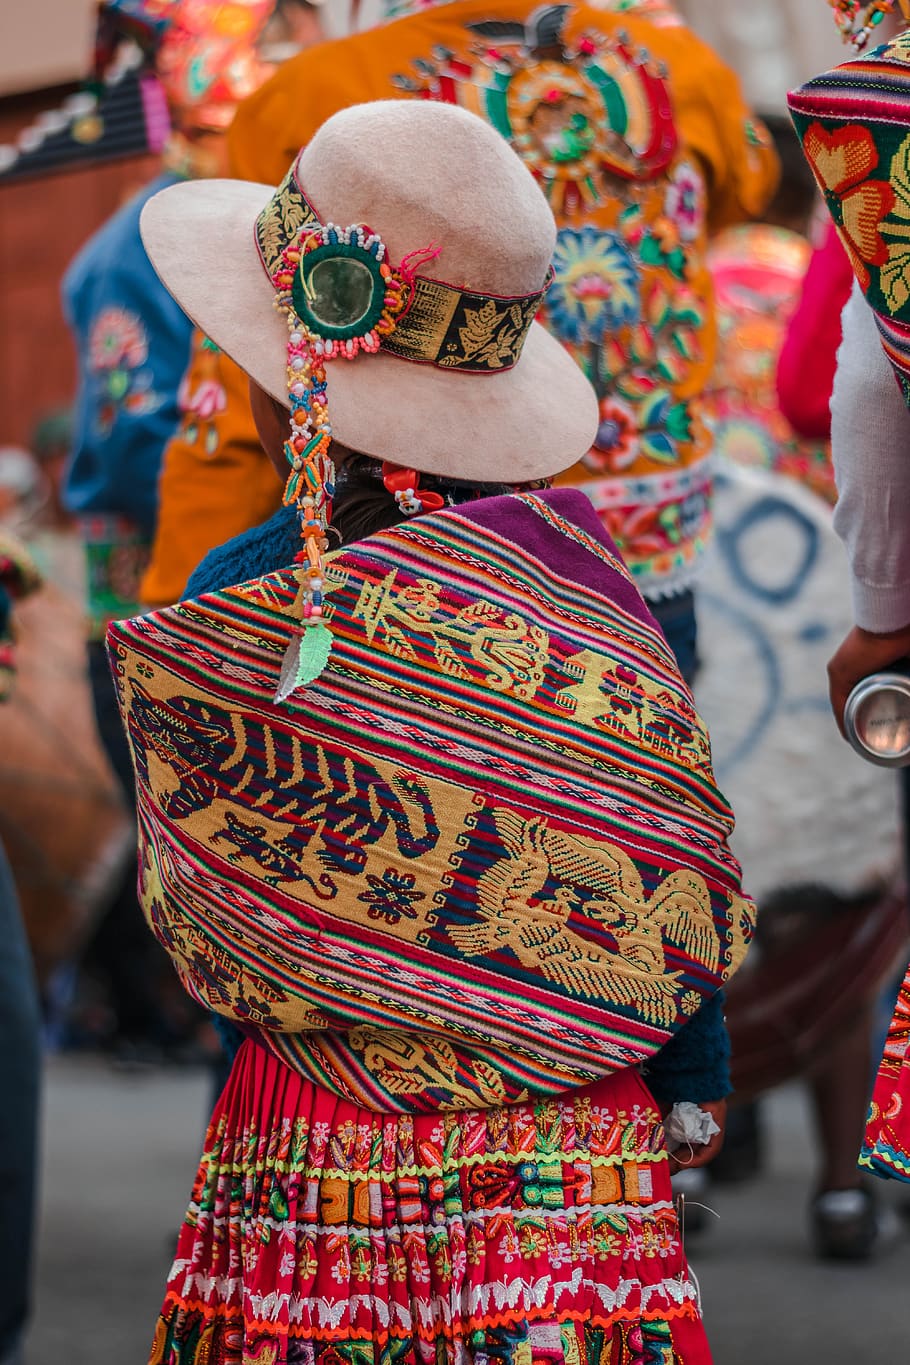 bolivia, dance, native, culture, cochabamba, roots, people, girl, focus on foreground, multi colored